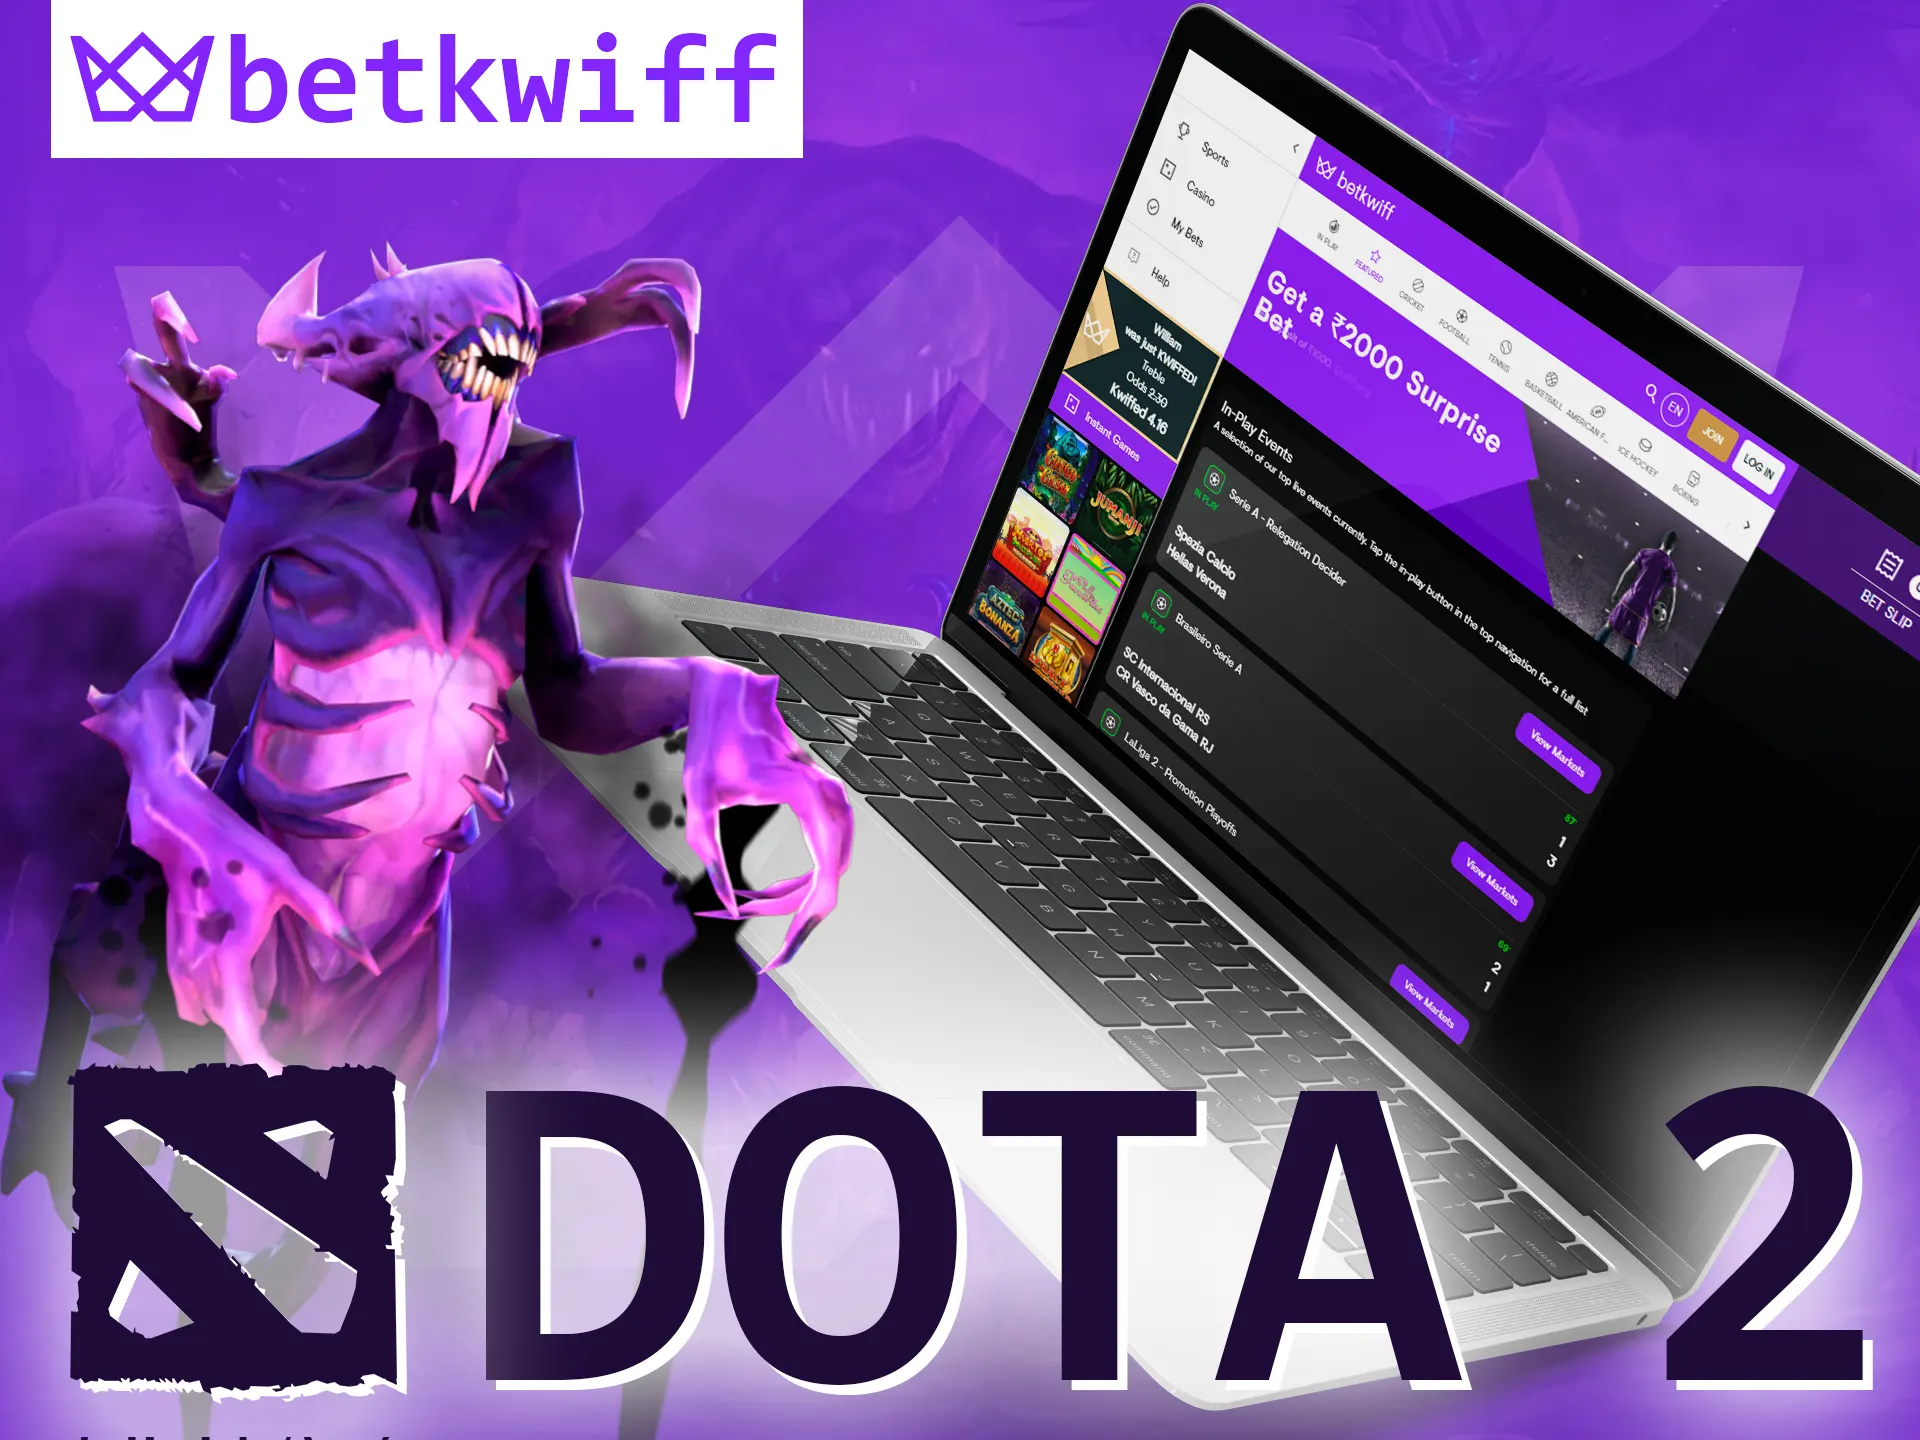 With Betkwiff make a swag for the game DOTA 2.